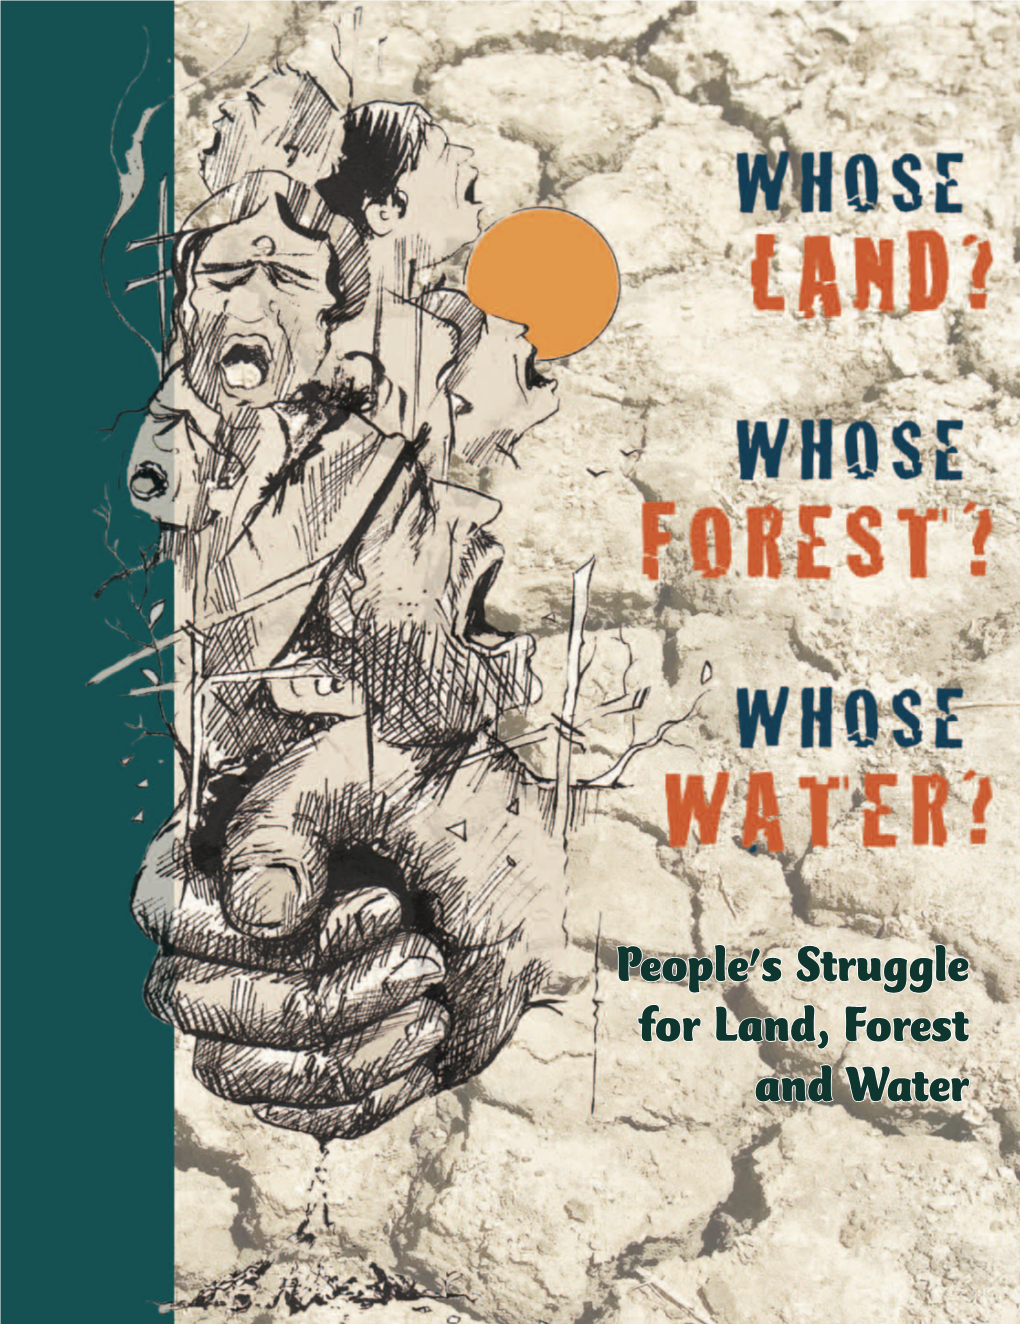 People's Struggle for Land, Forest and Water